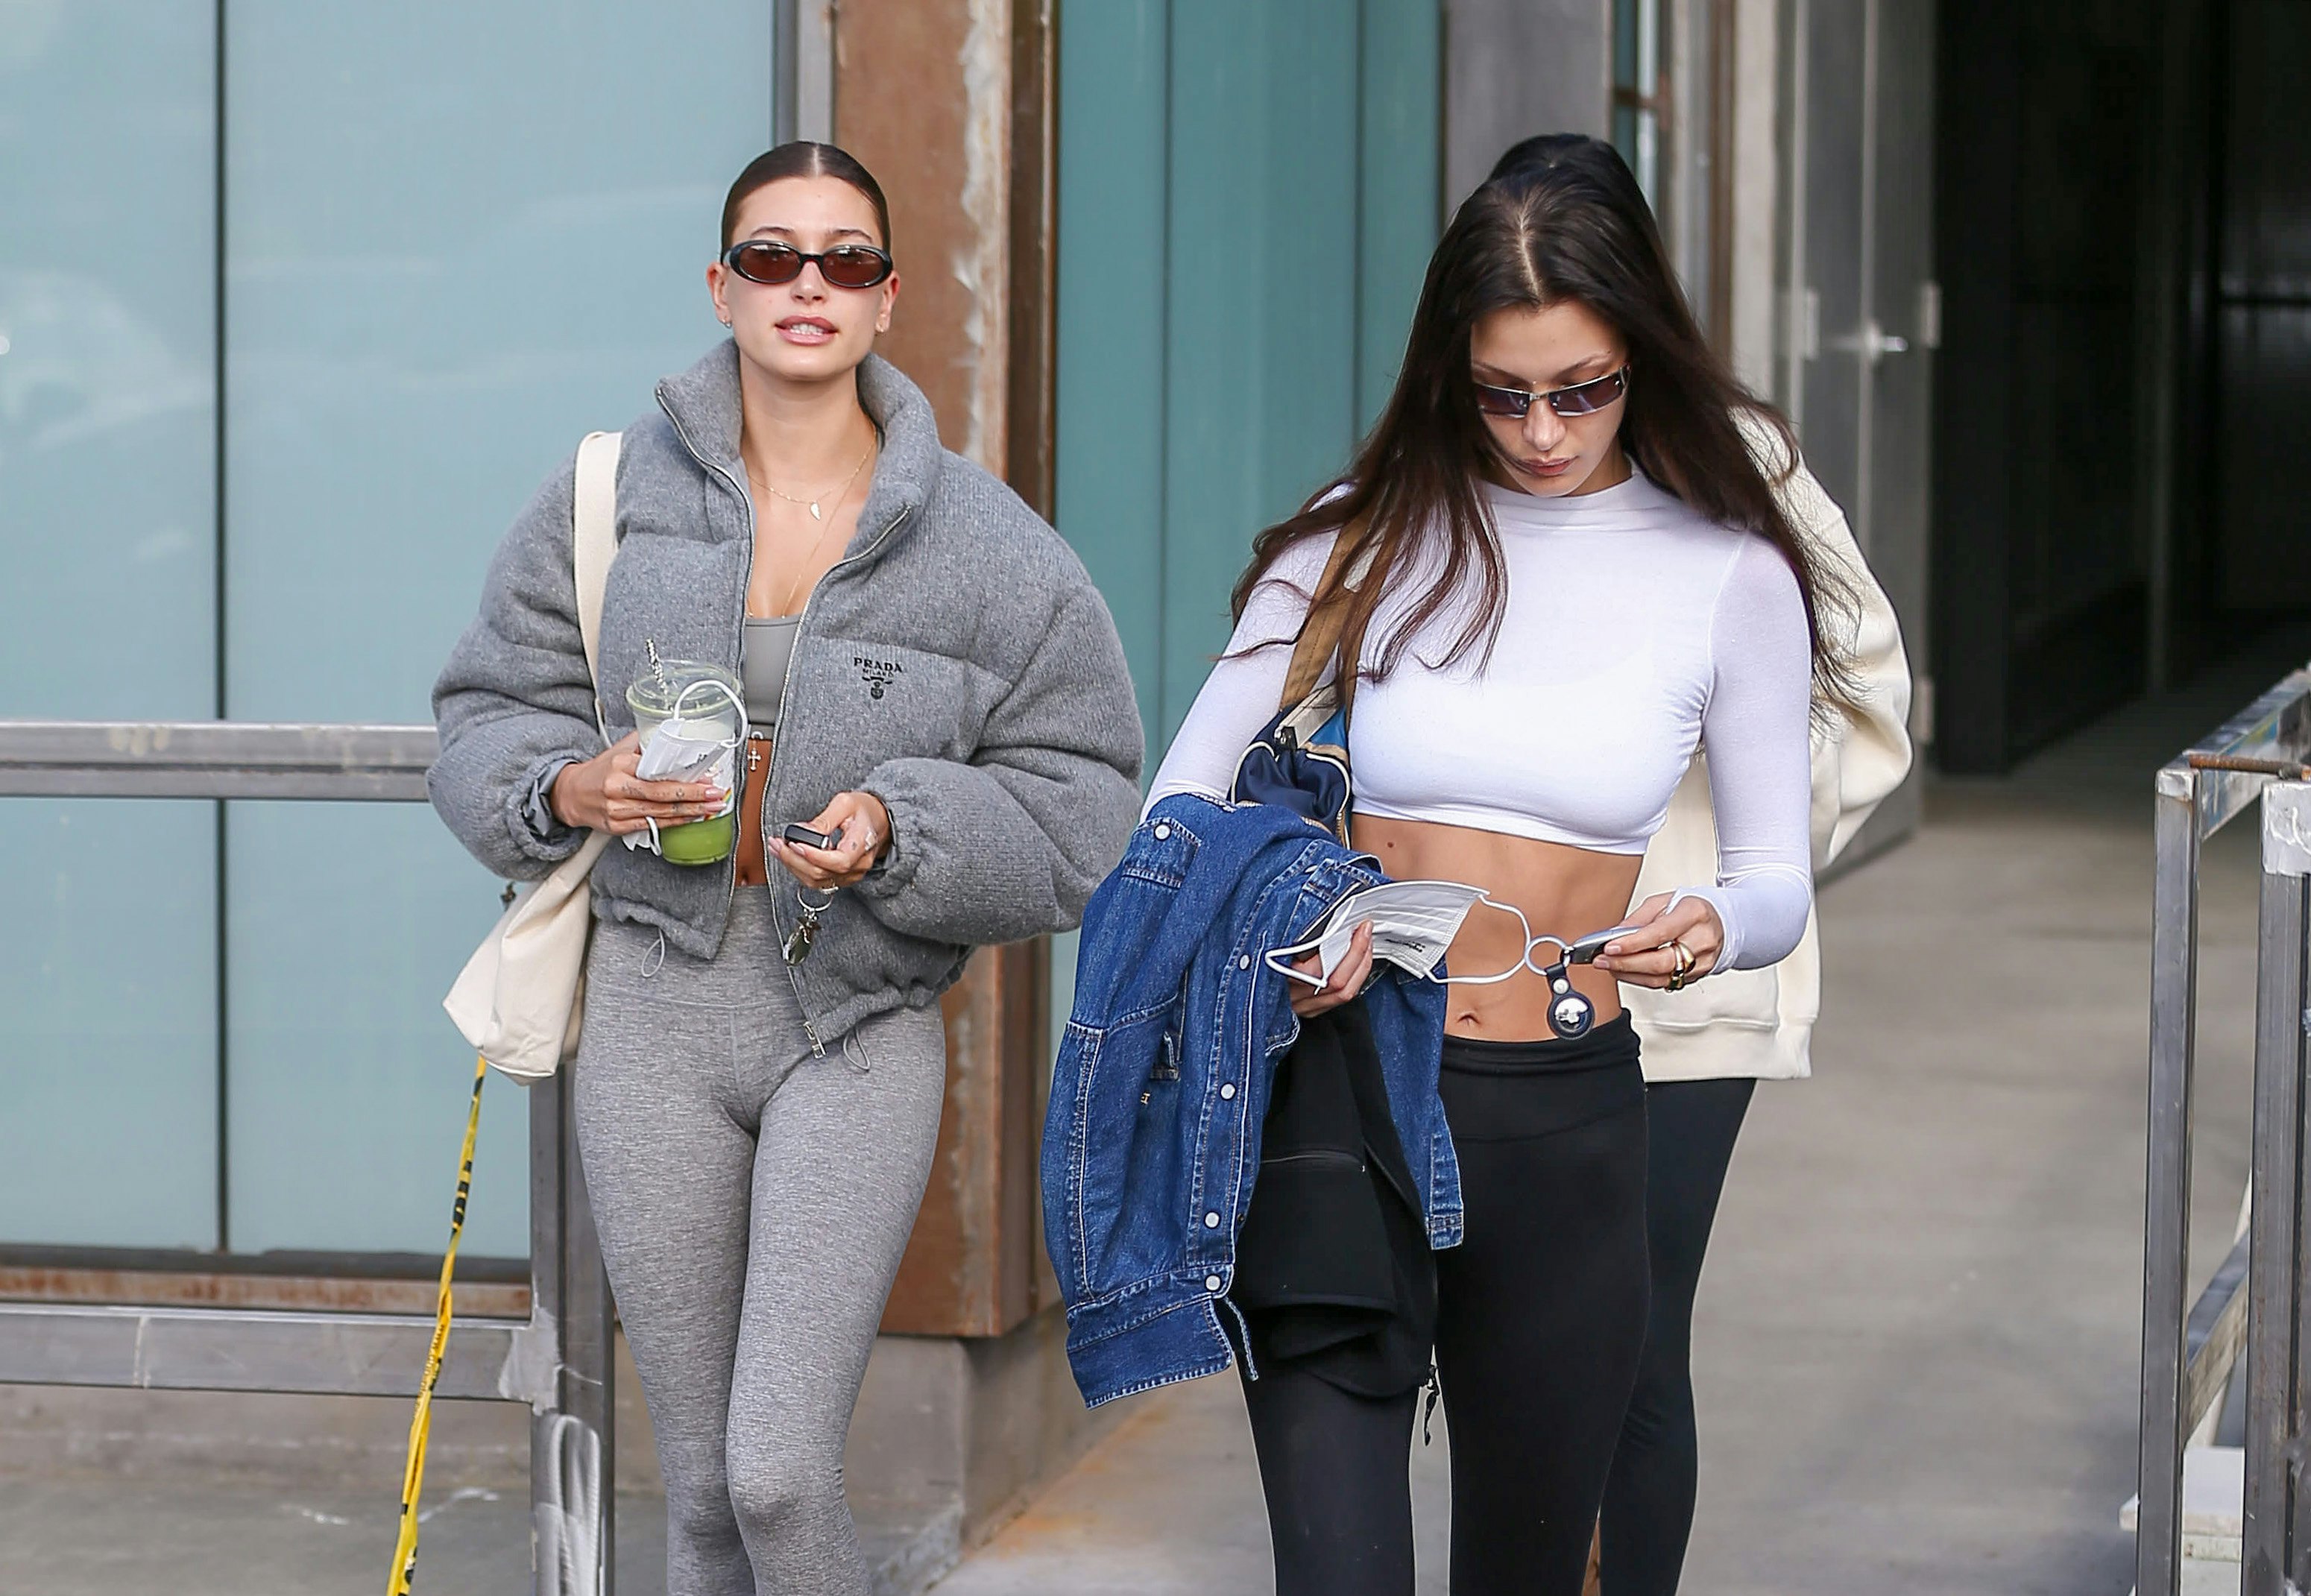 Bella Hadid wears a blue bodysuit with SO many cut-outs